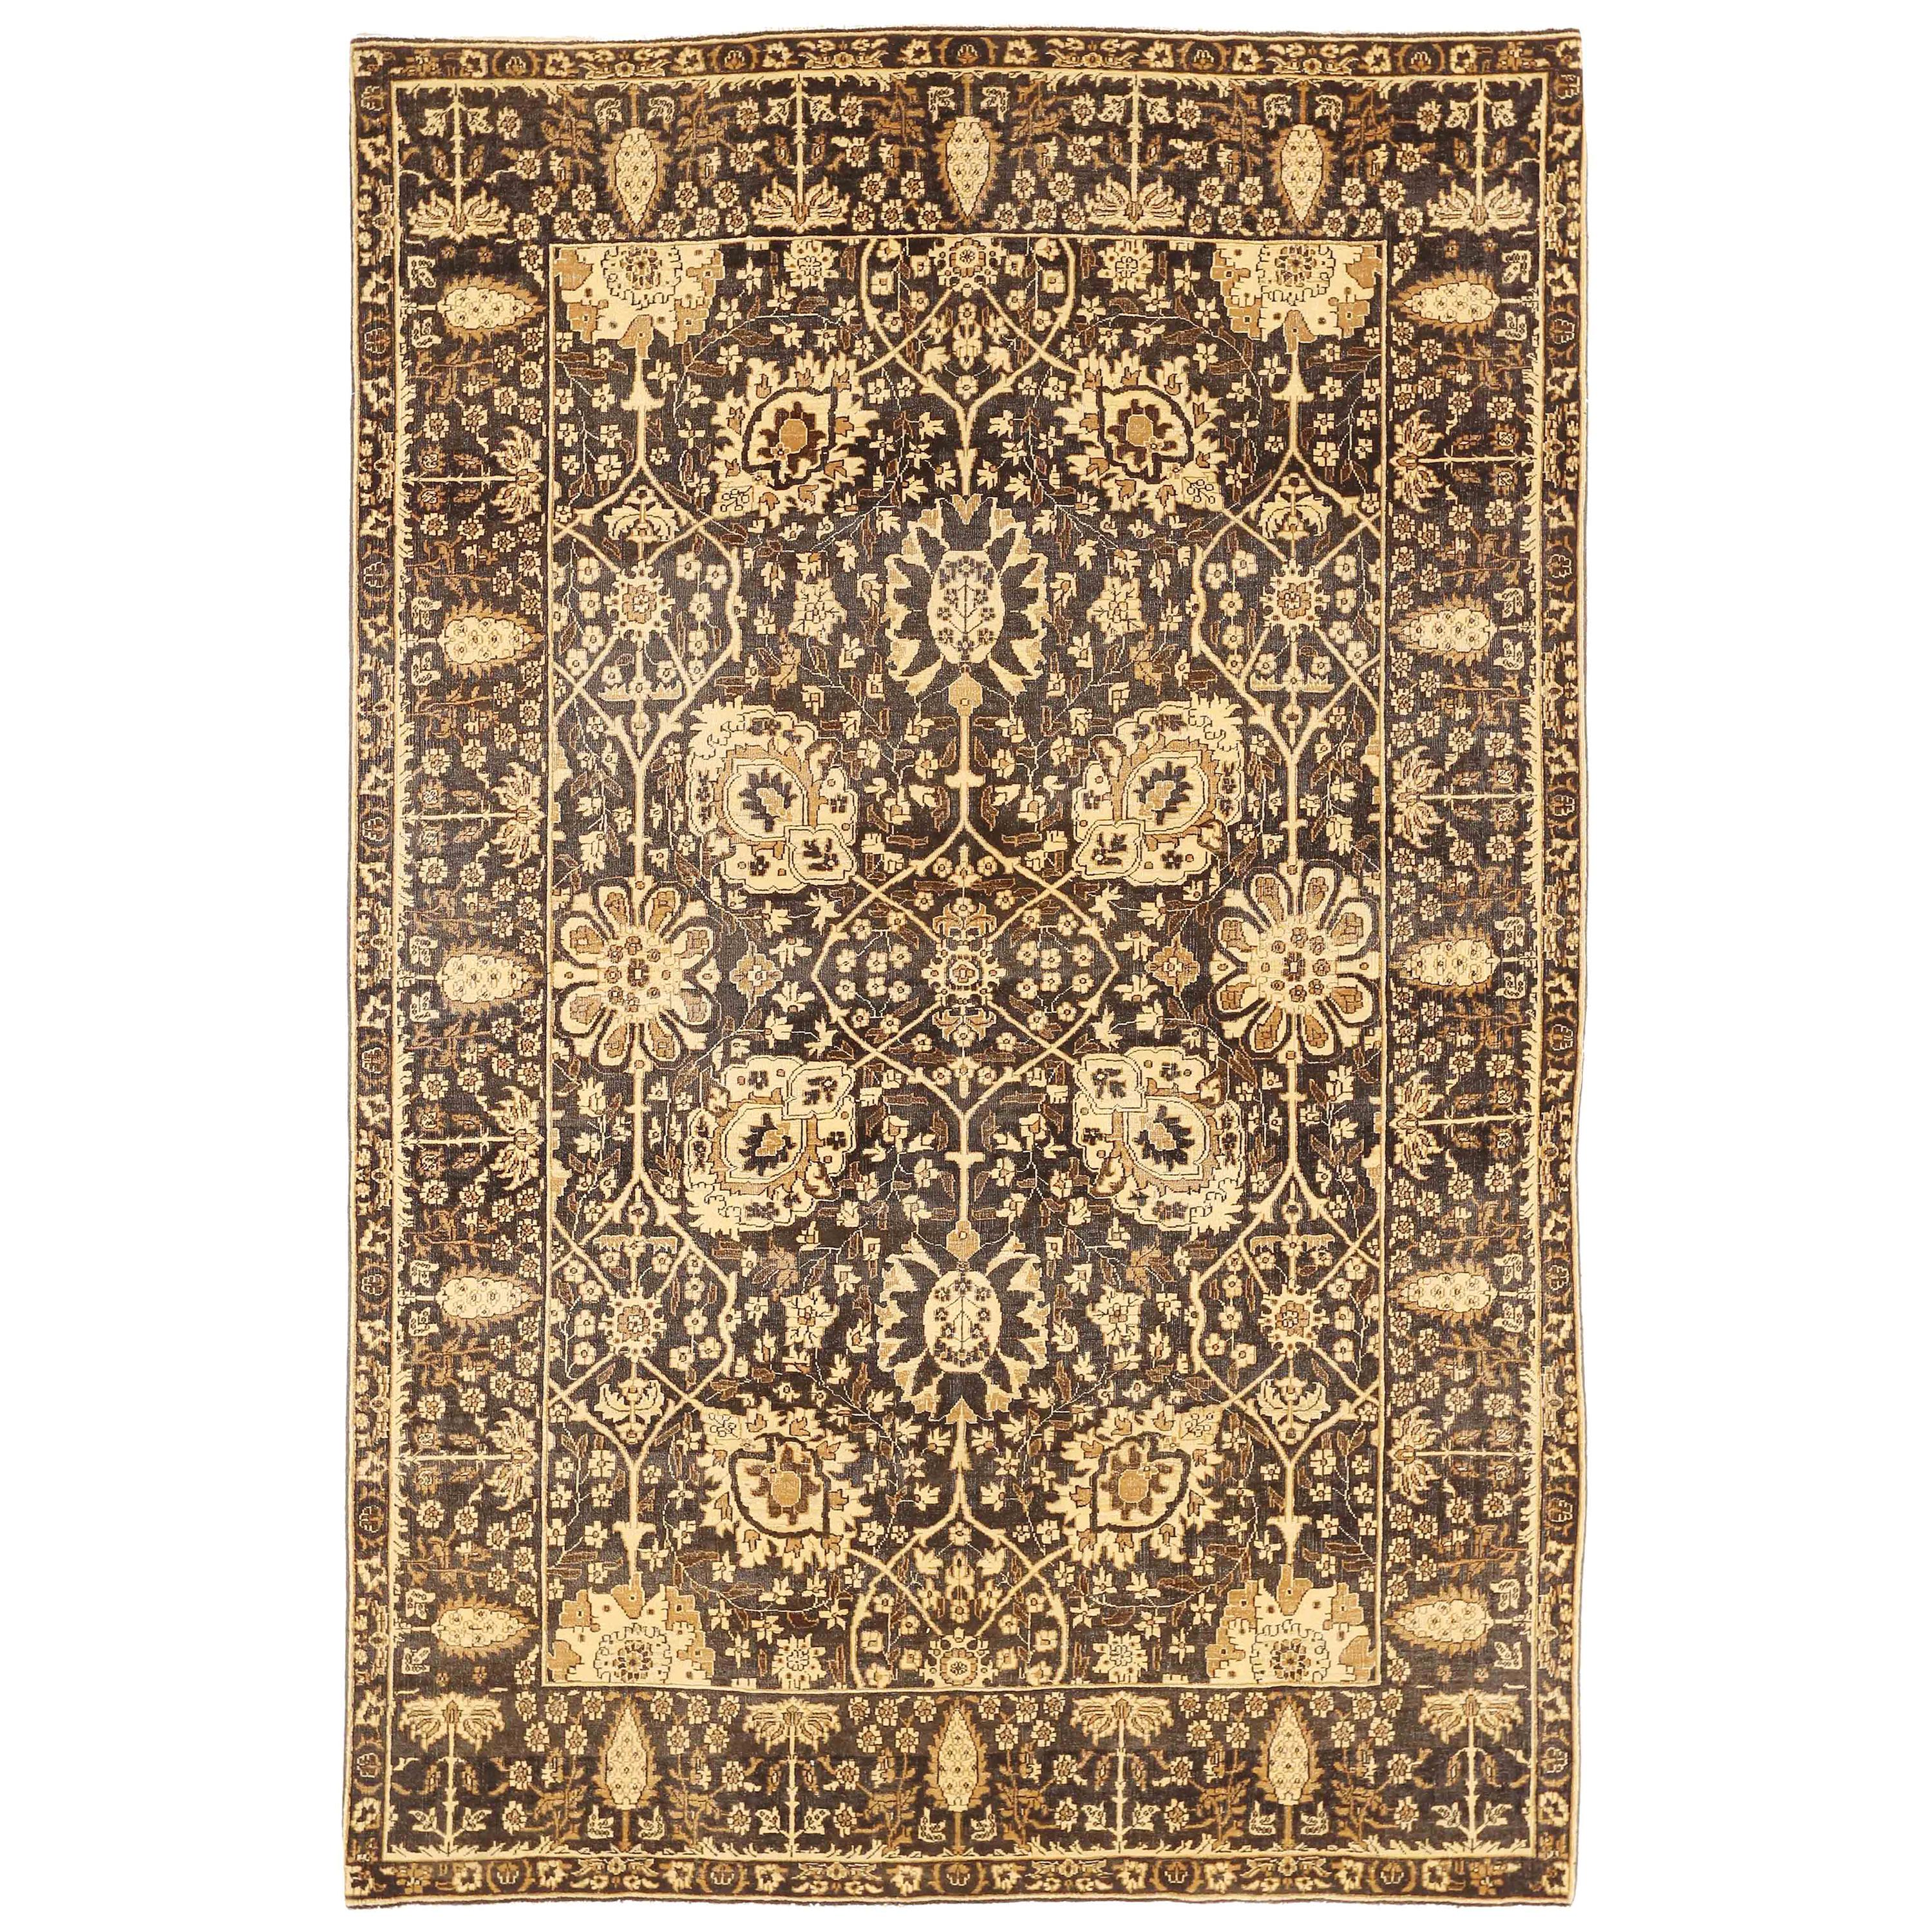 Contemporary Turkish Tabriz Rug with Brown & Ivory Floral Motifs on Black Field